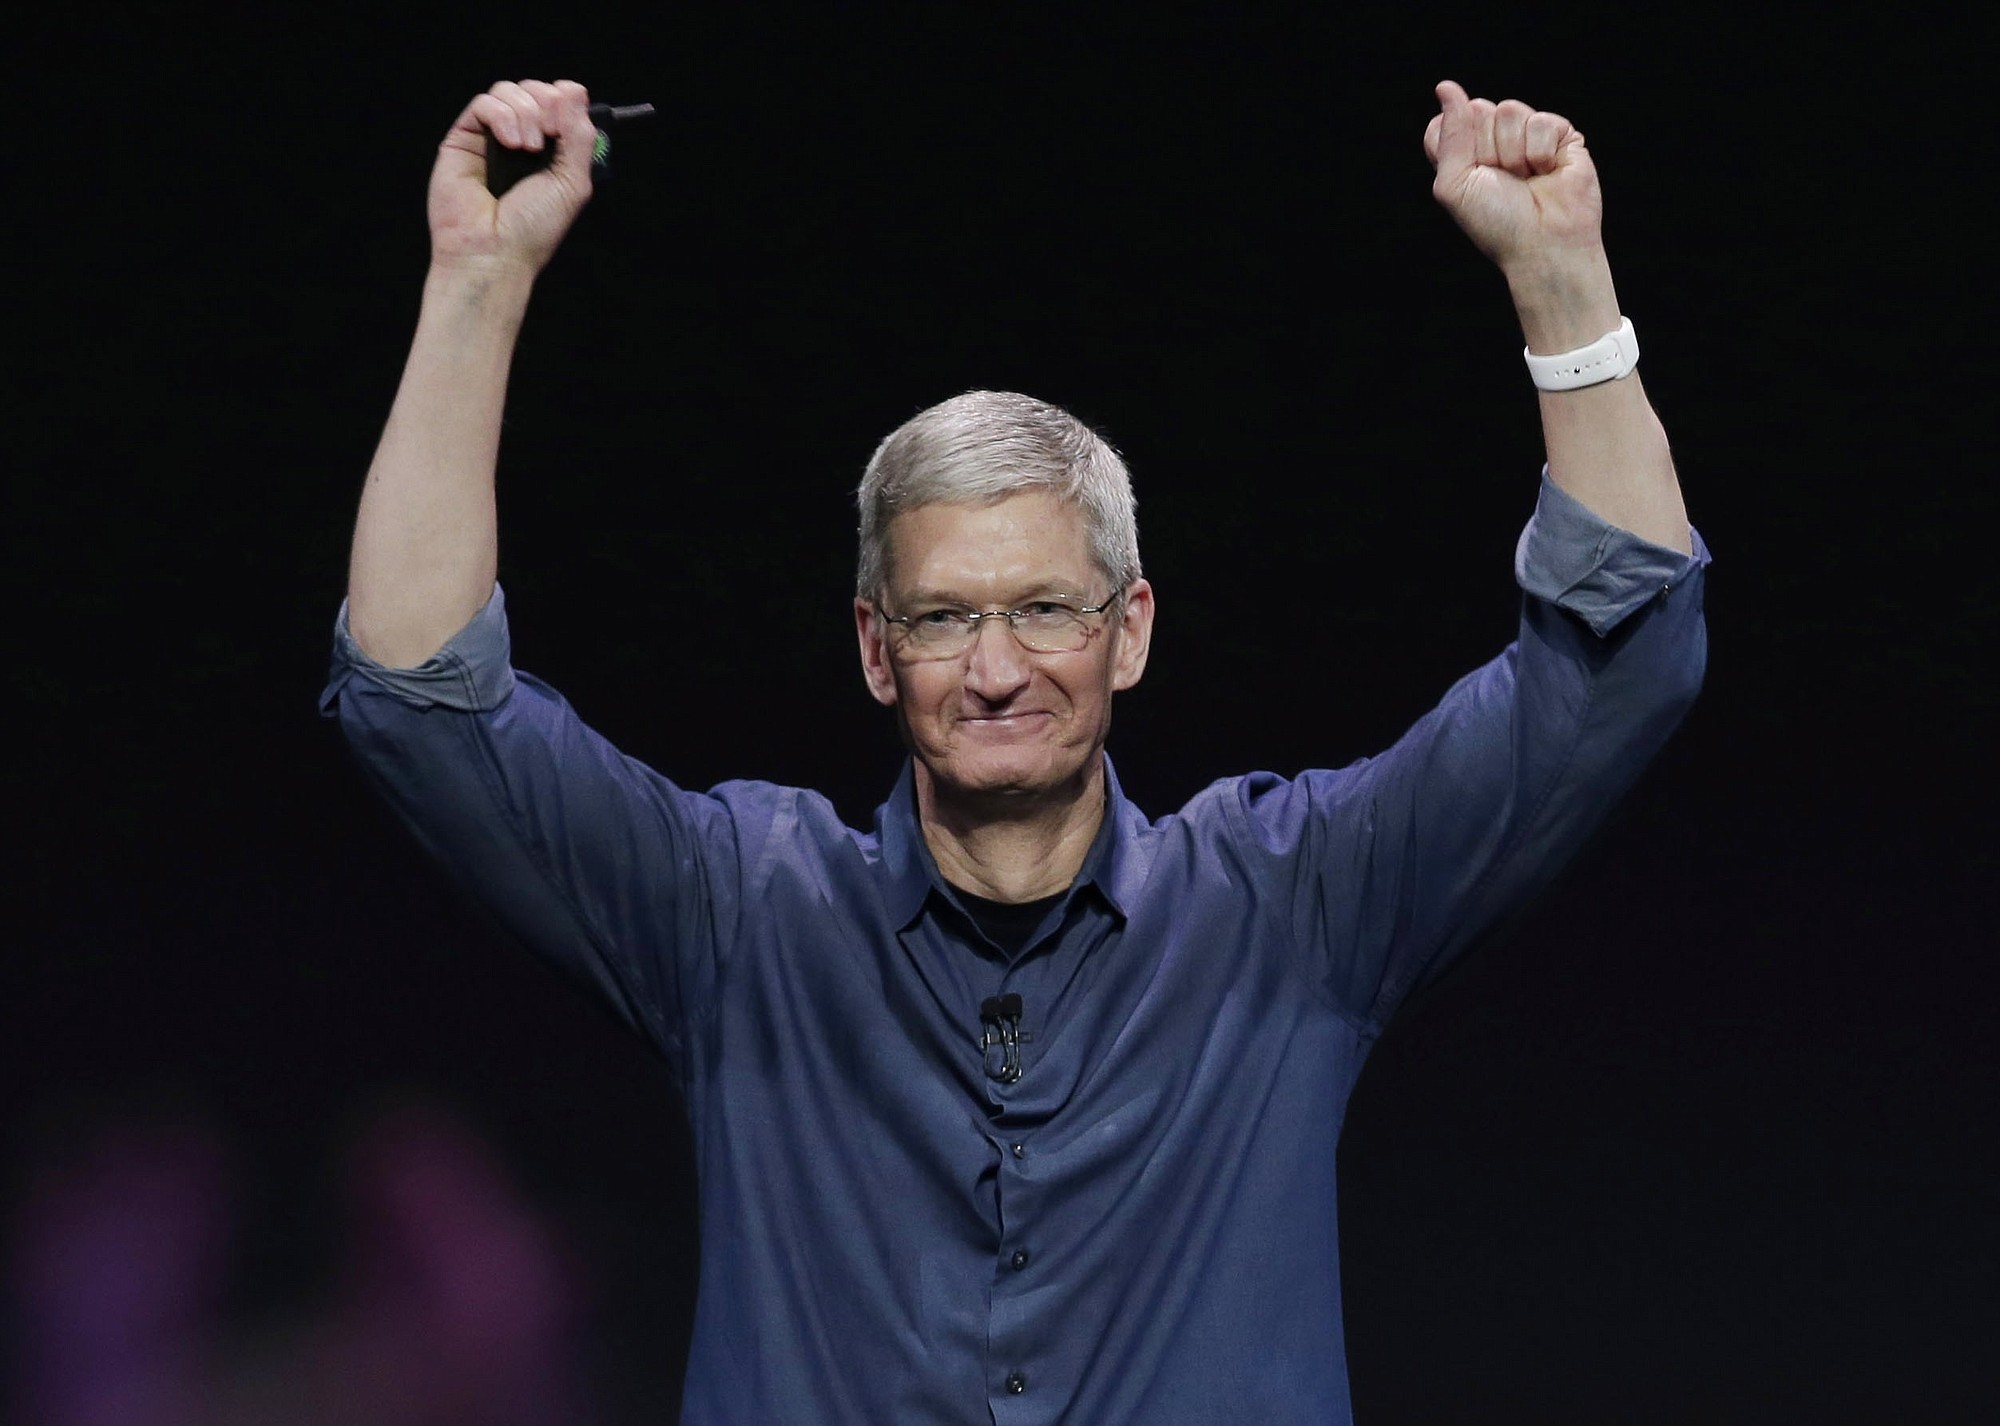 Apple CEO Tim Cook introduces Apple Watch, which he is wearing on his wrist in Cupertino, Calif.